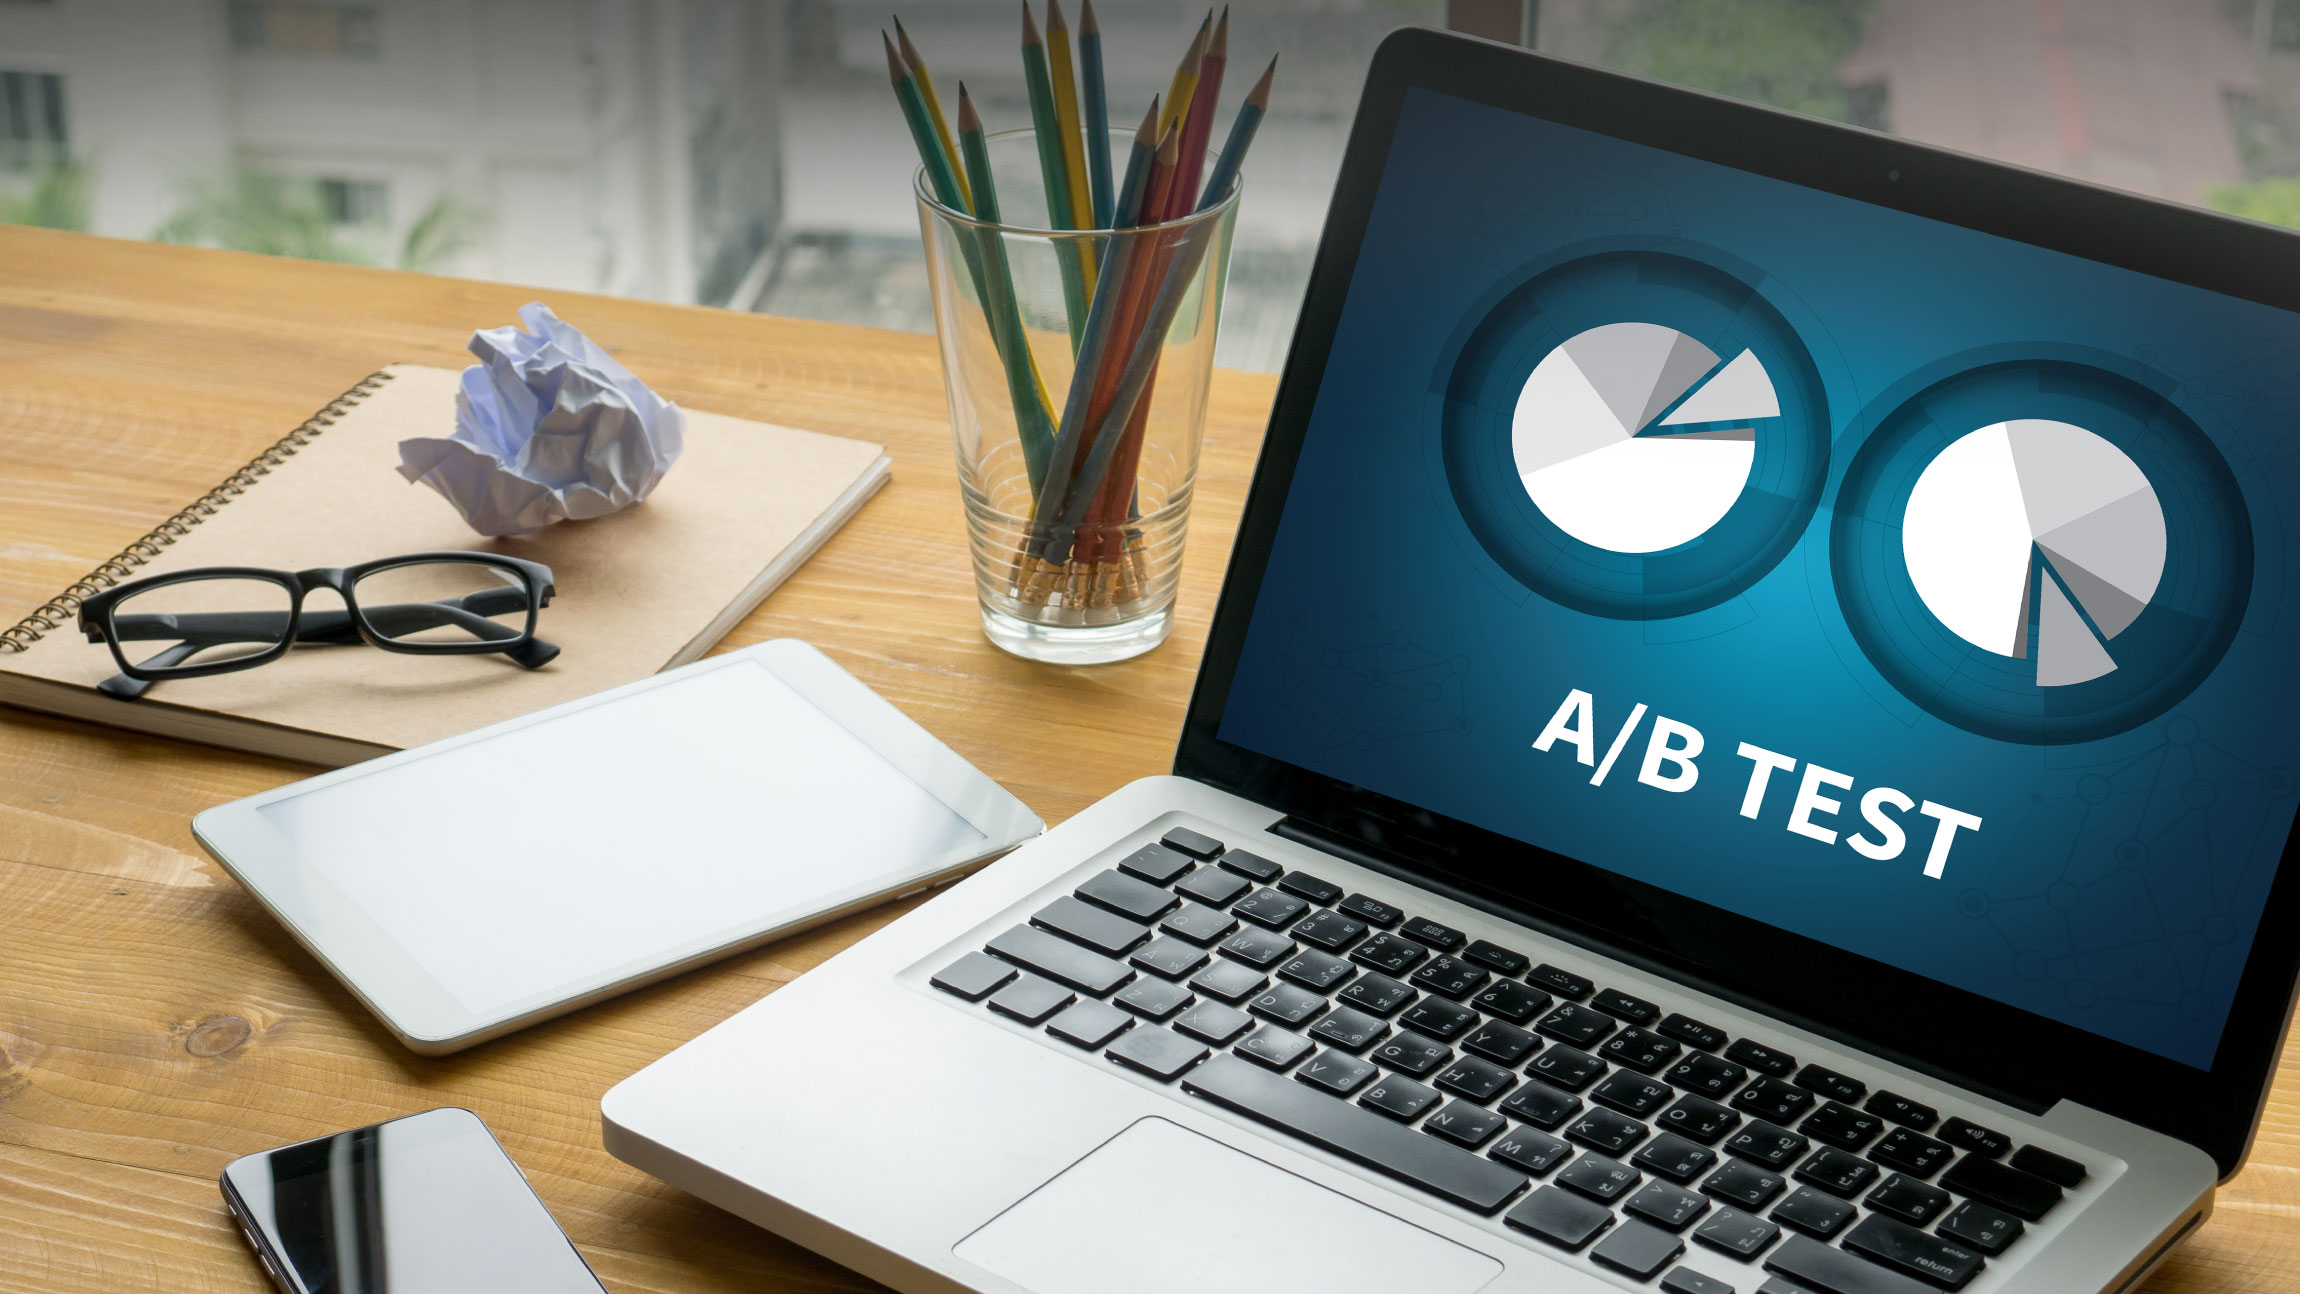 A/B Testing to improve the performance of your website